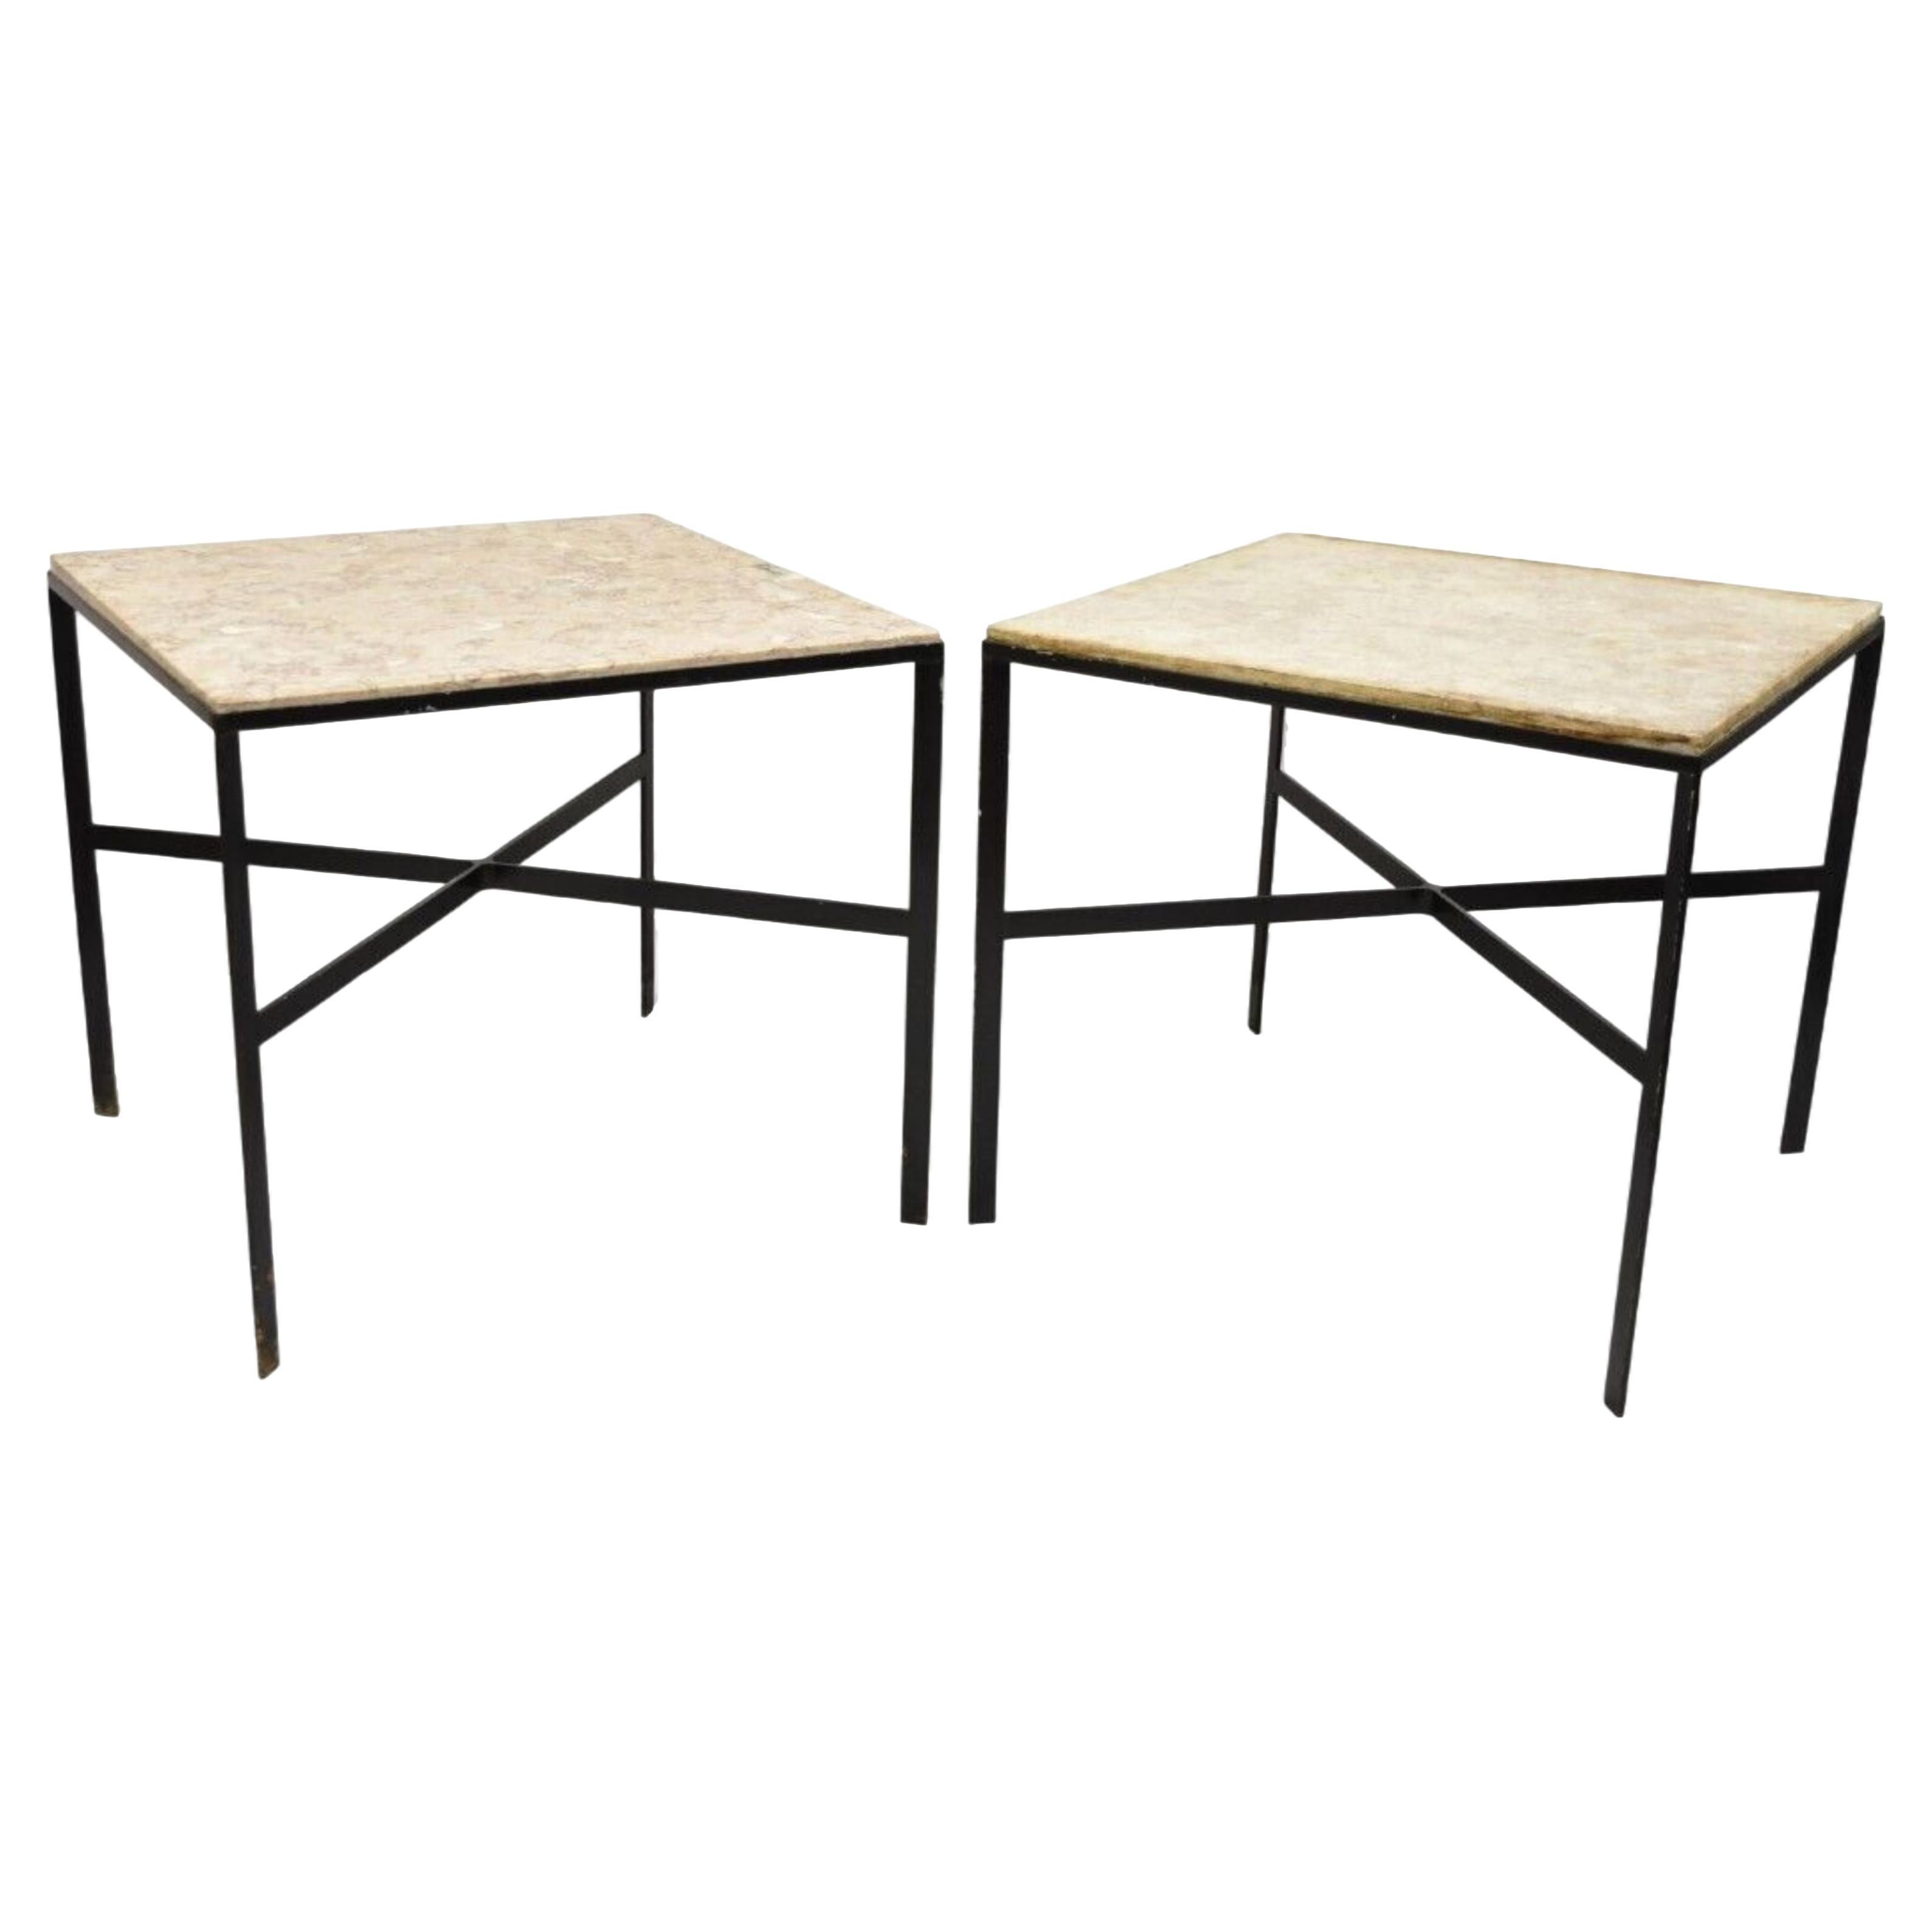 Vintage Paul McCobb Style Wrought Iron and Marble Square Side Tables - a Pair For Sale